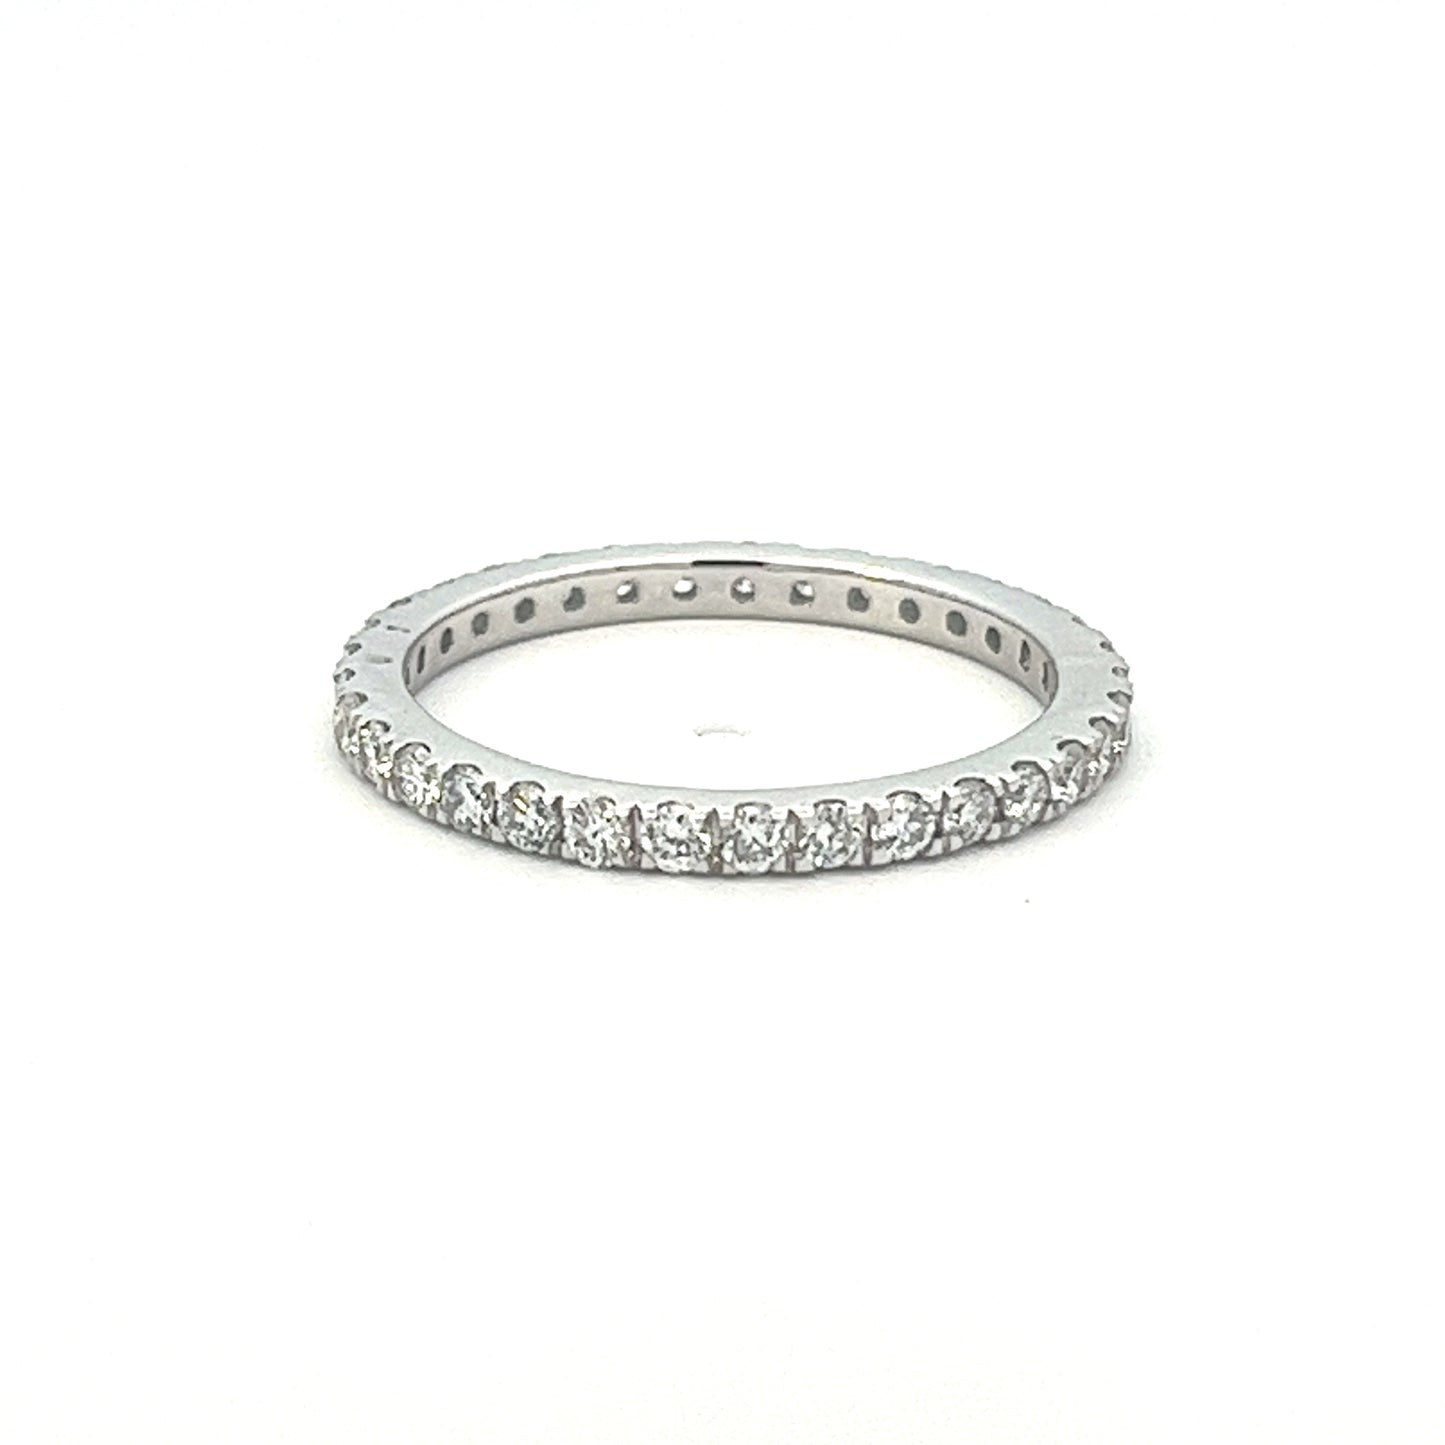 3/4ct total weight diamond eternity band